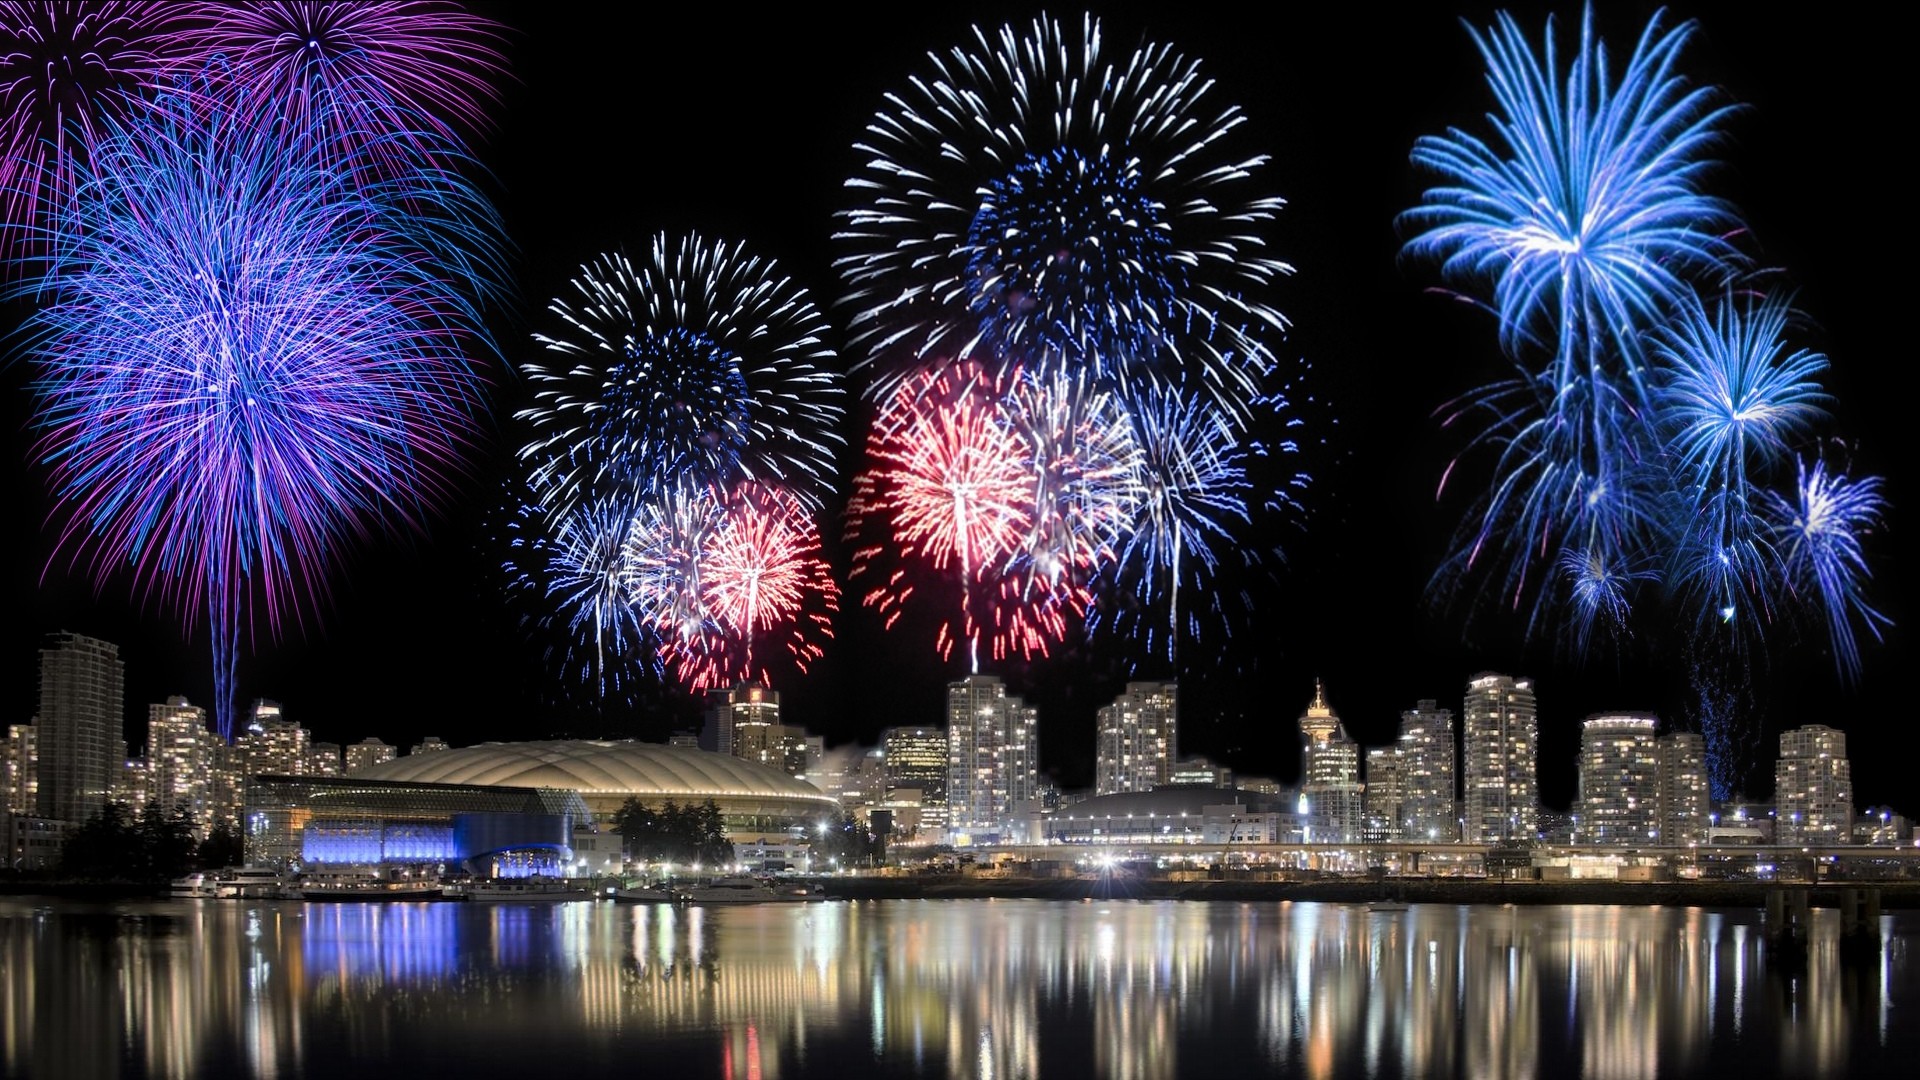 Fireworks Live Wallpaper – Android Apps on Google Play